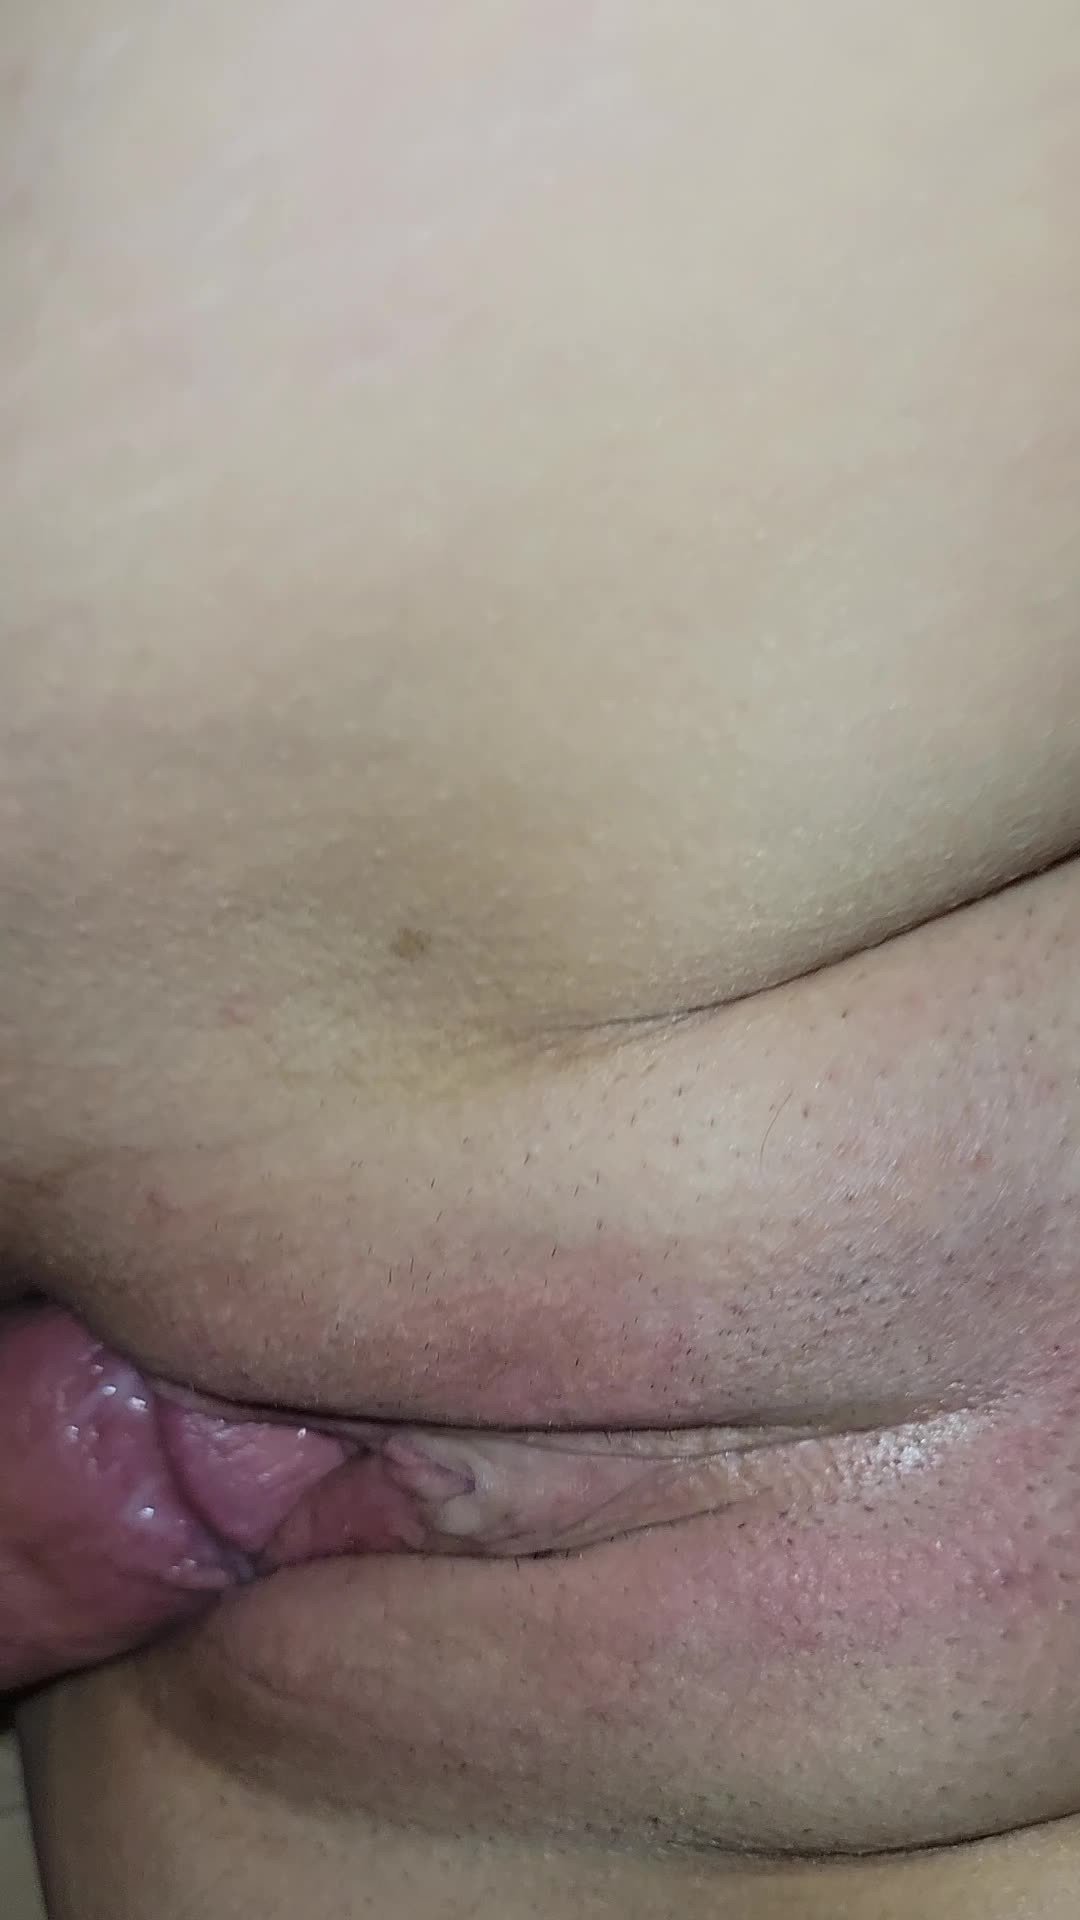 Video post by Hot Wife Having Fun